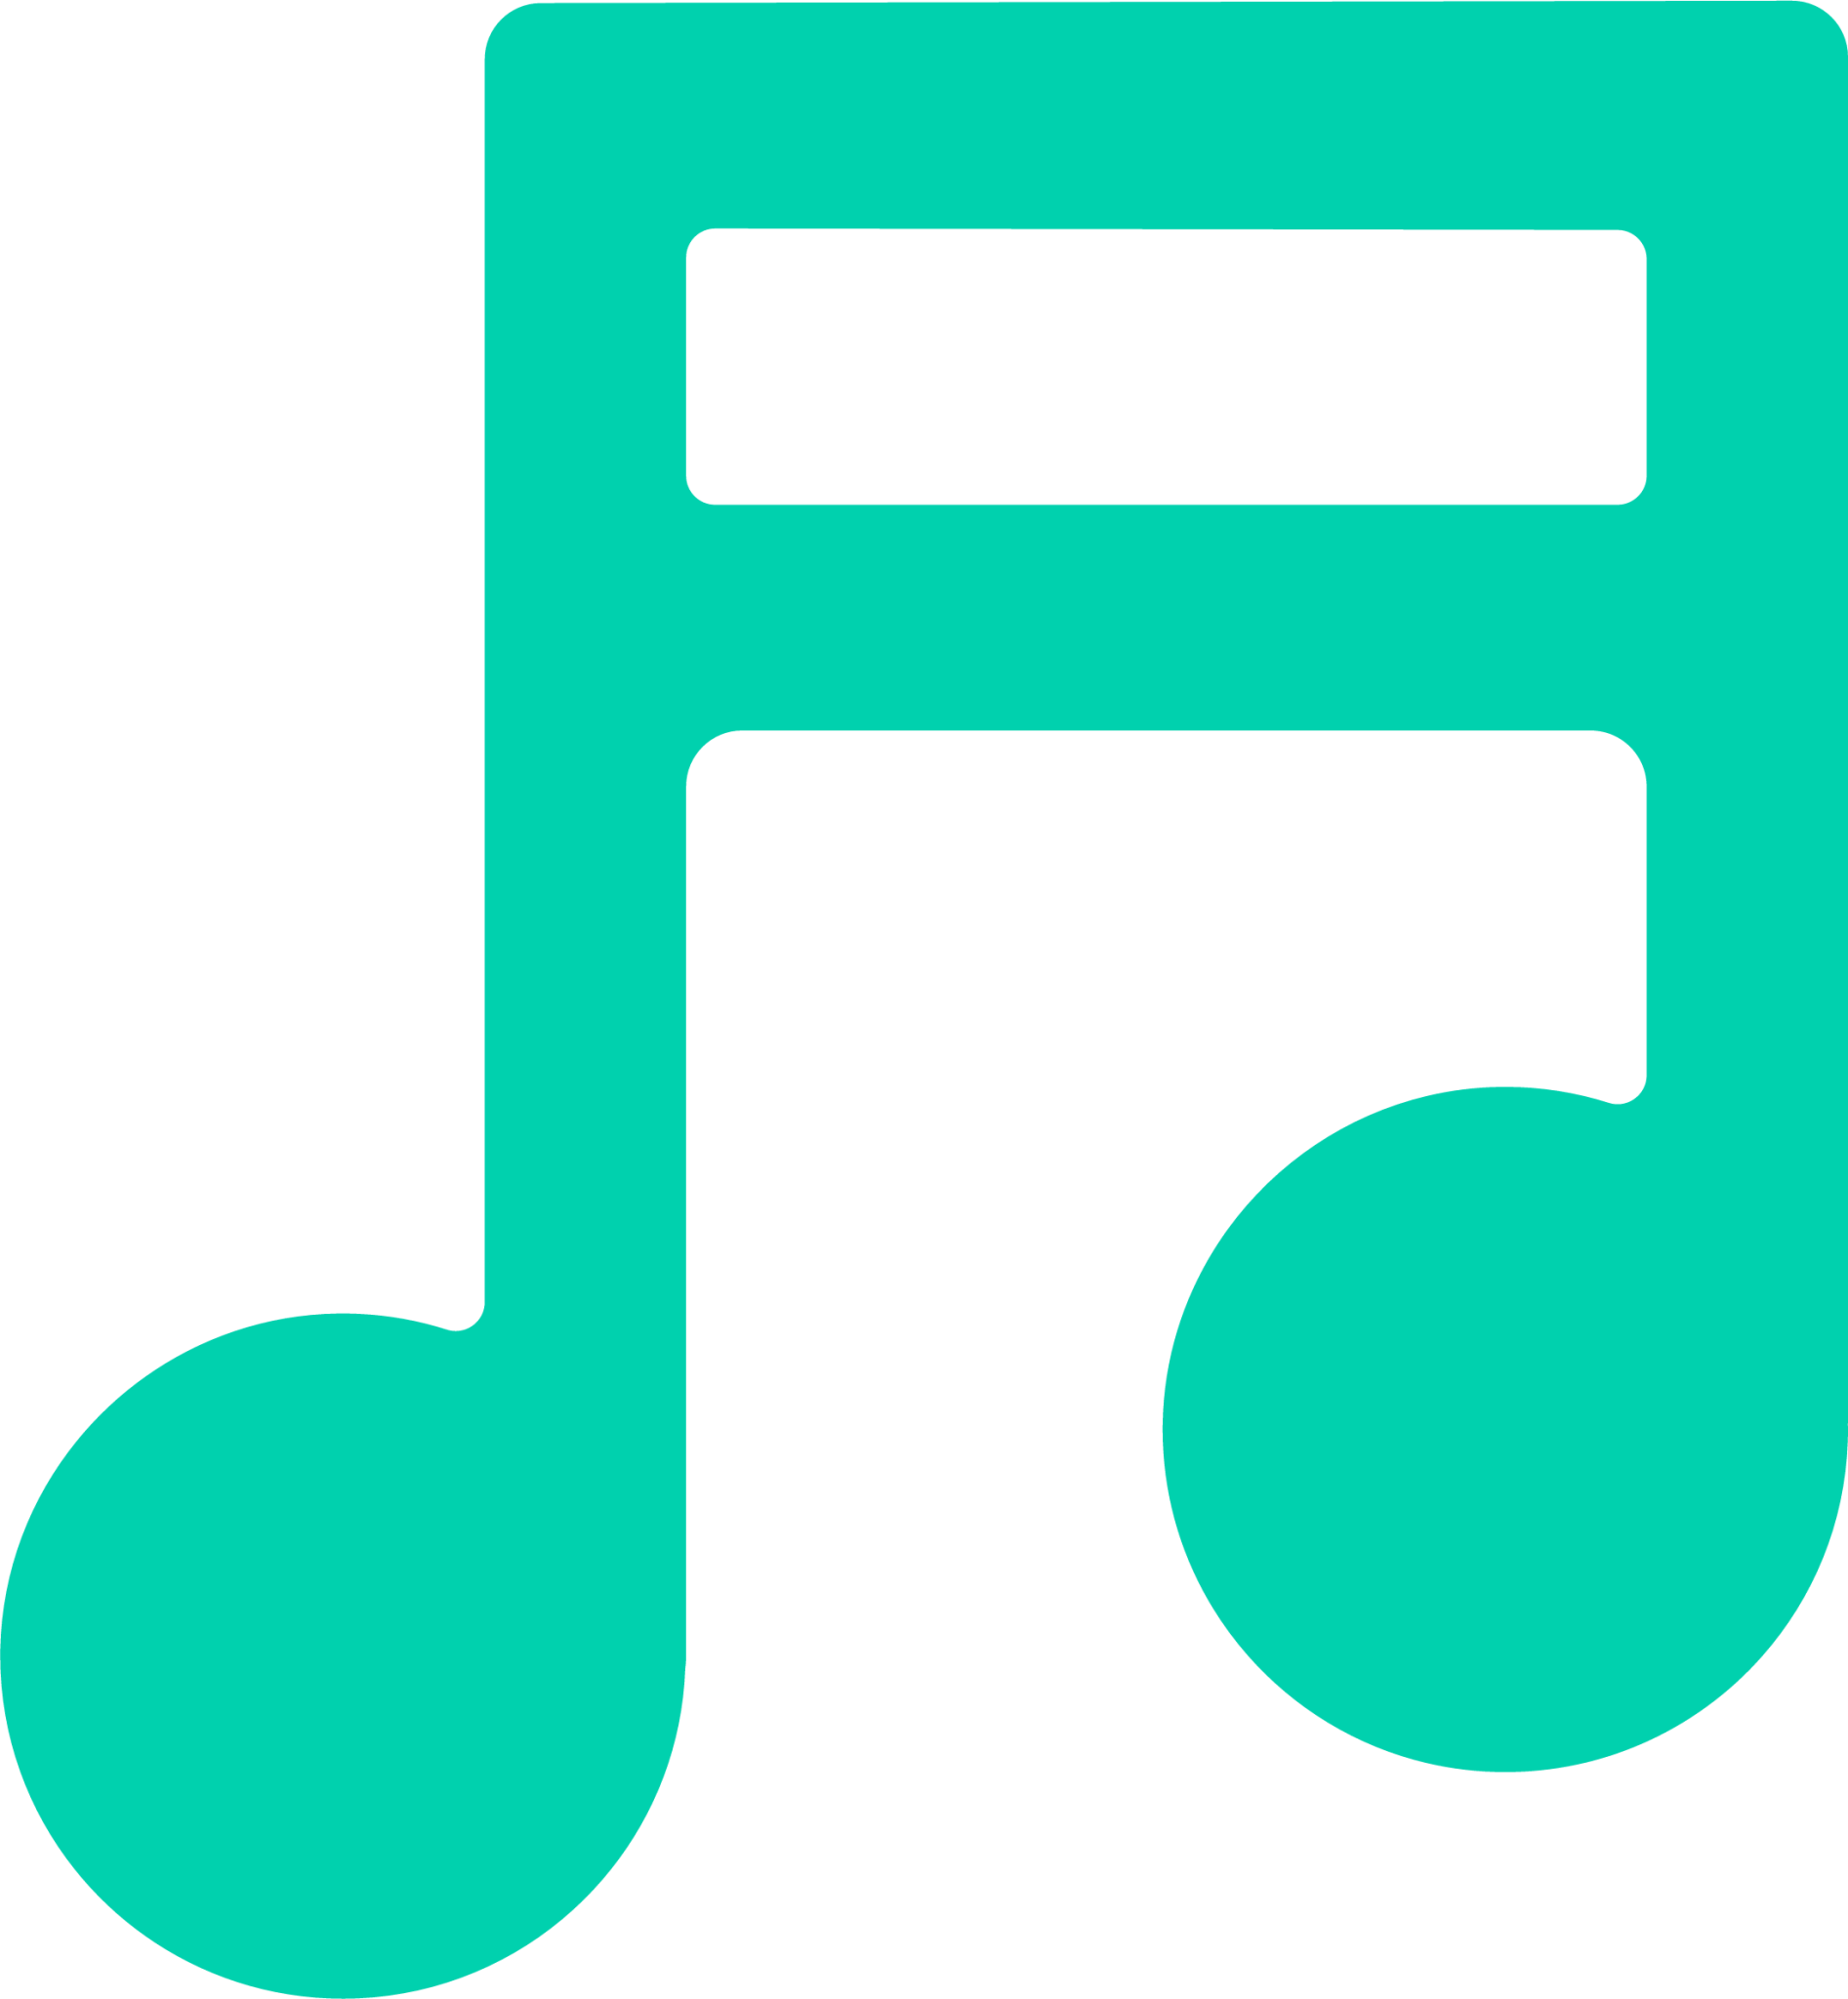 green music note icon